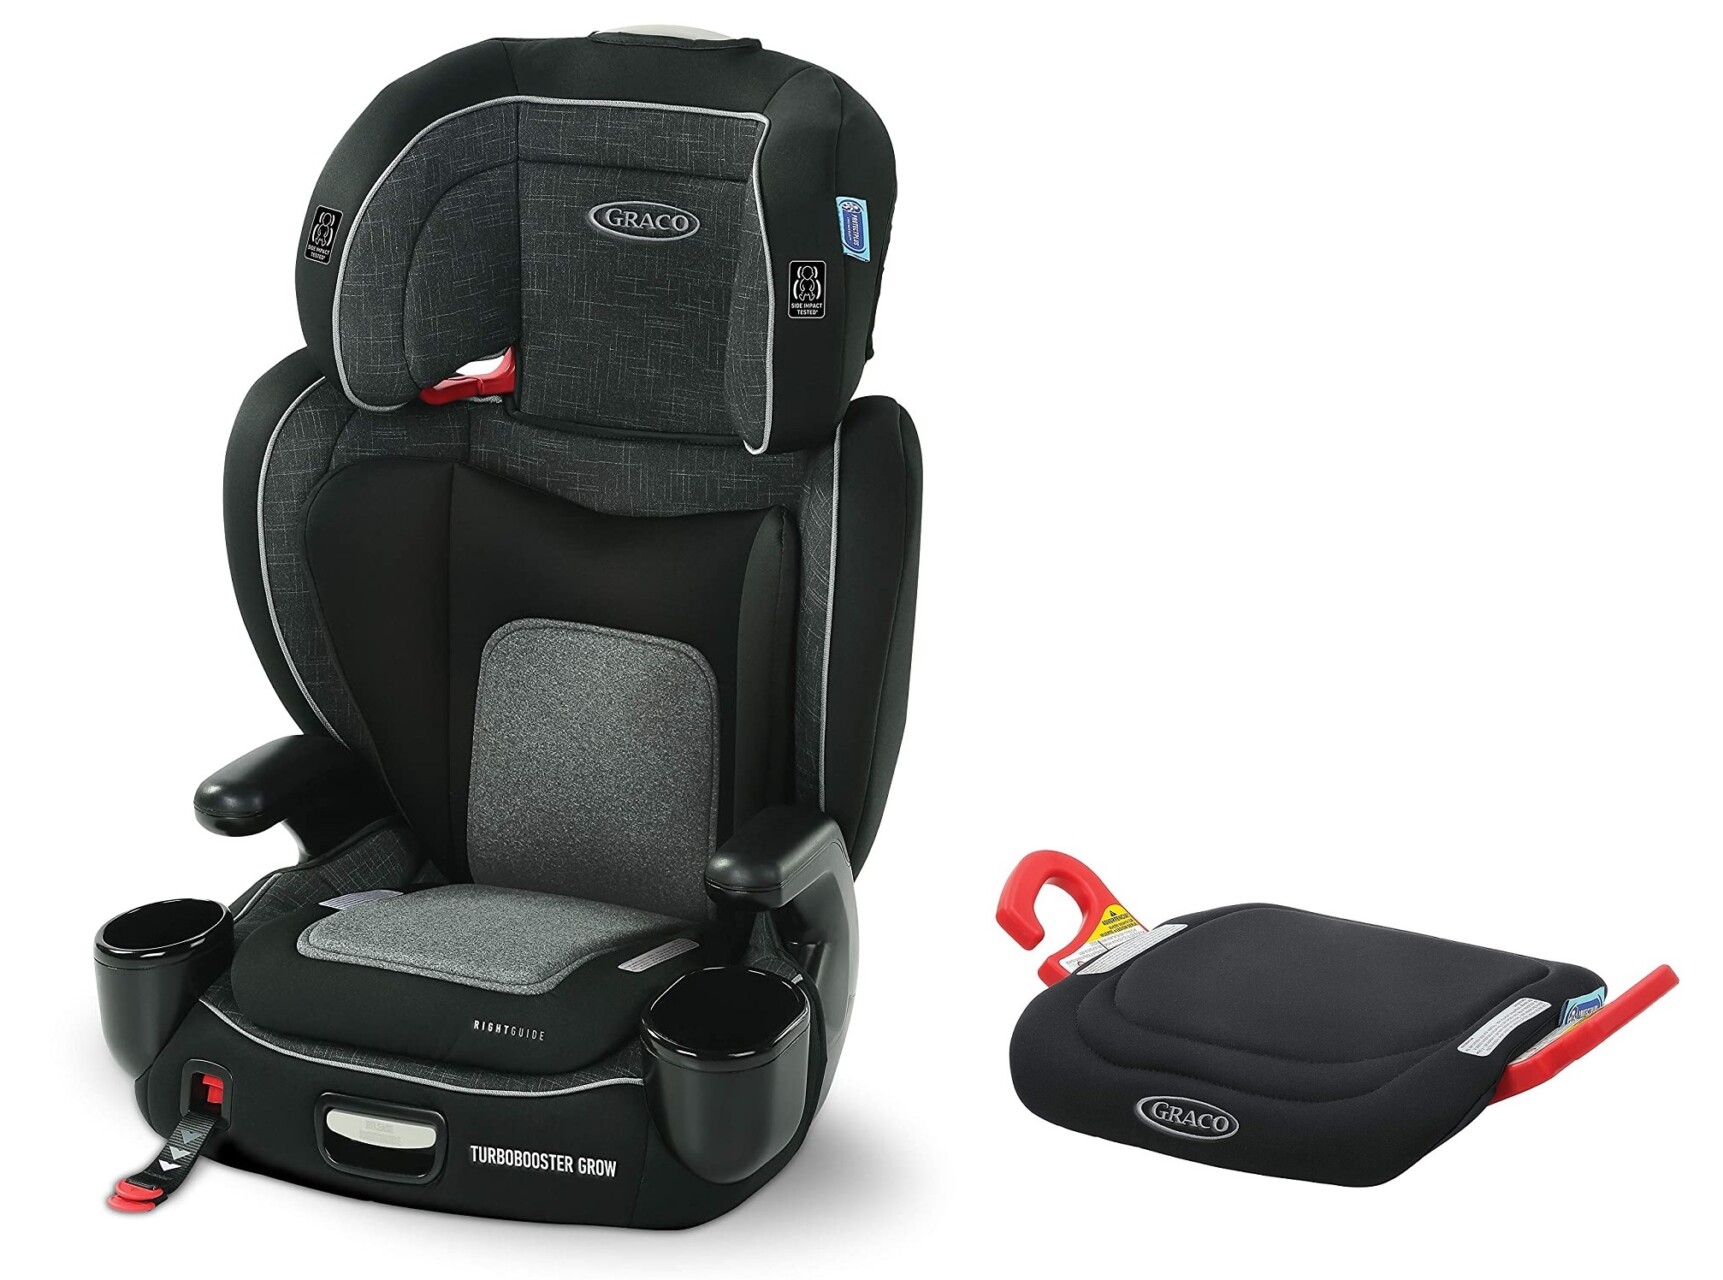 Comparison of Budget-Priced Backless Boosters Under $25 – CarseatBlog